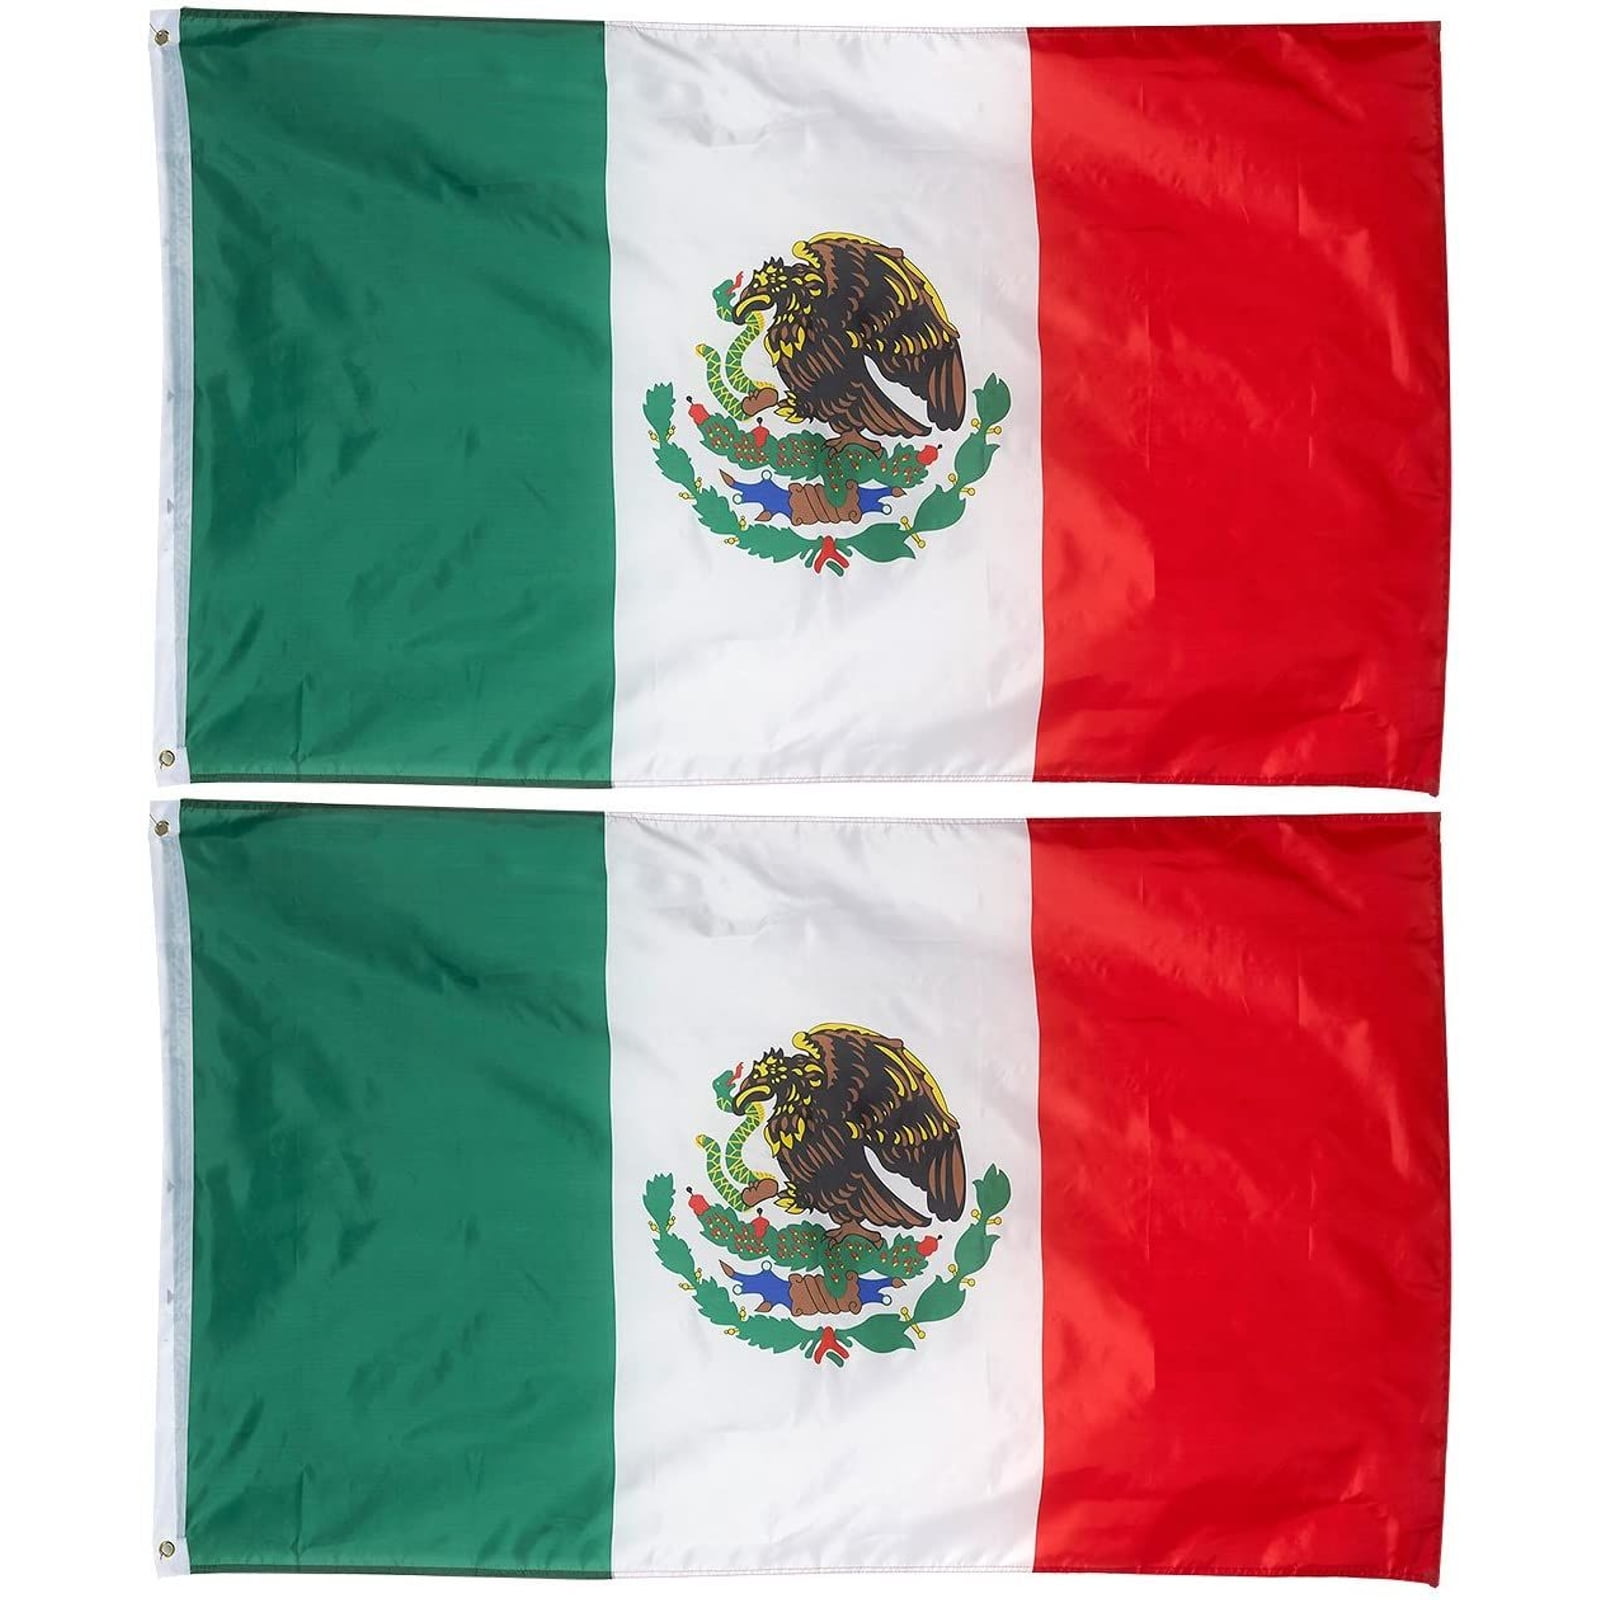 New 3’x5’ Polyester MEXICO FLAG Mexican Country Outdoor Banner Grommets 